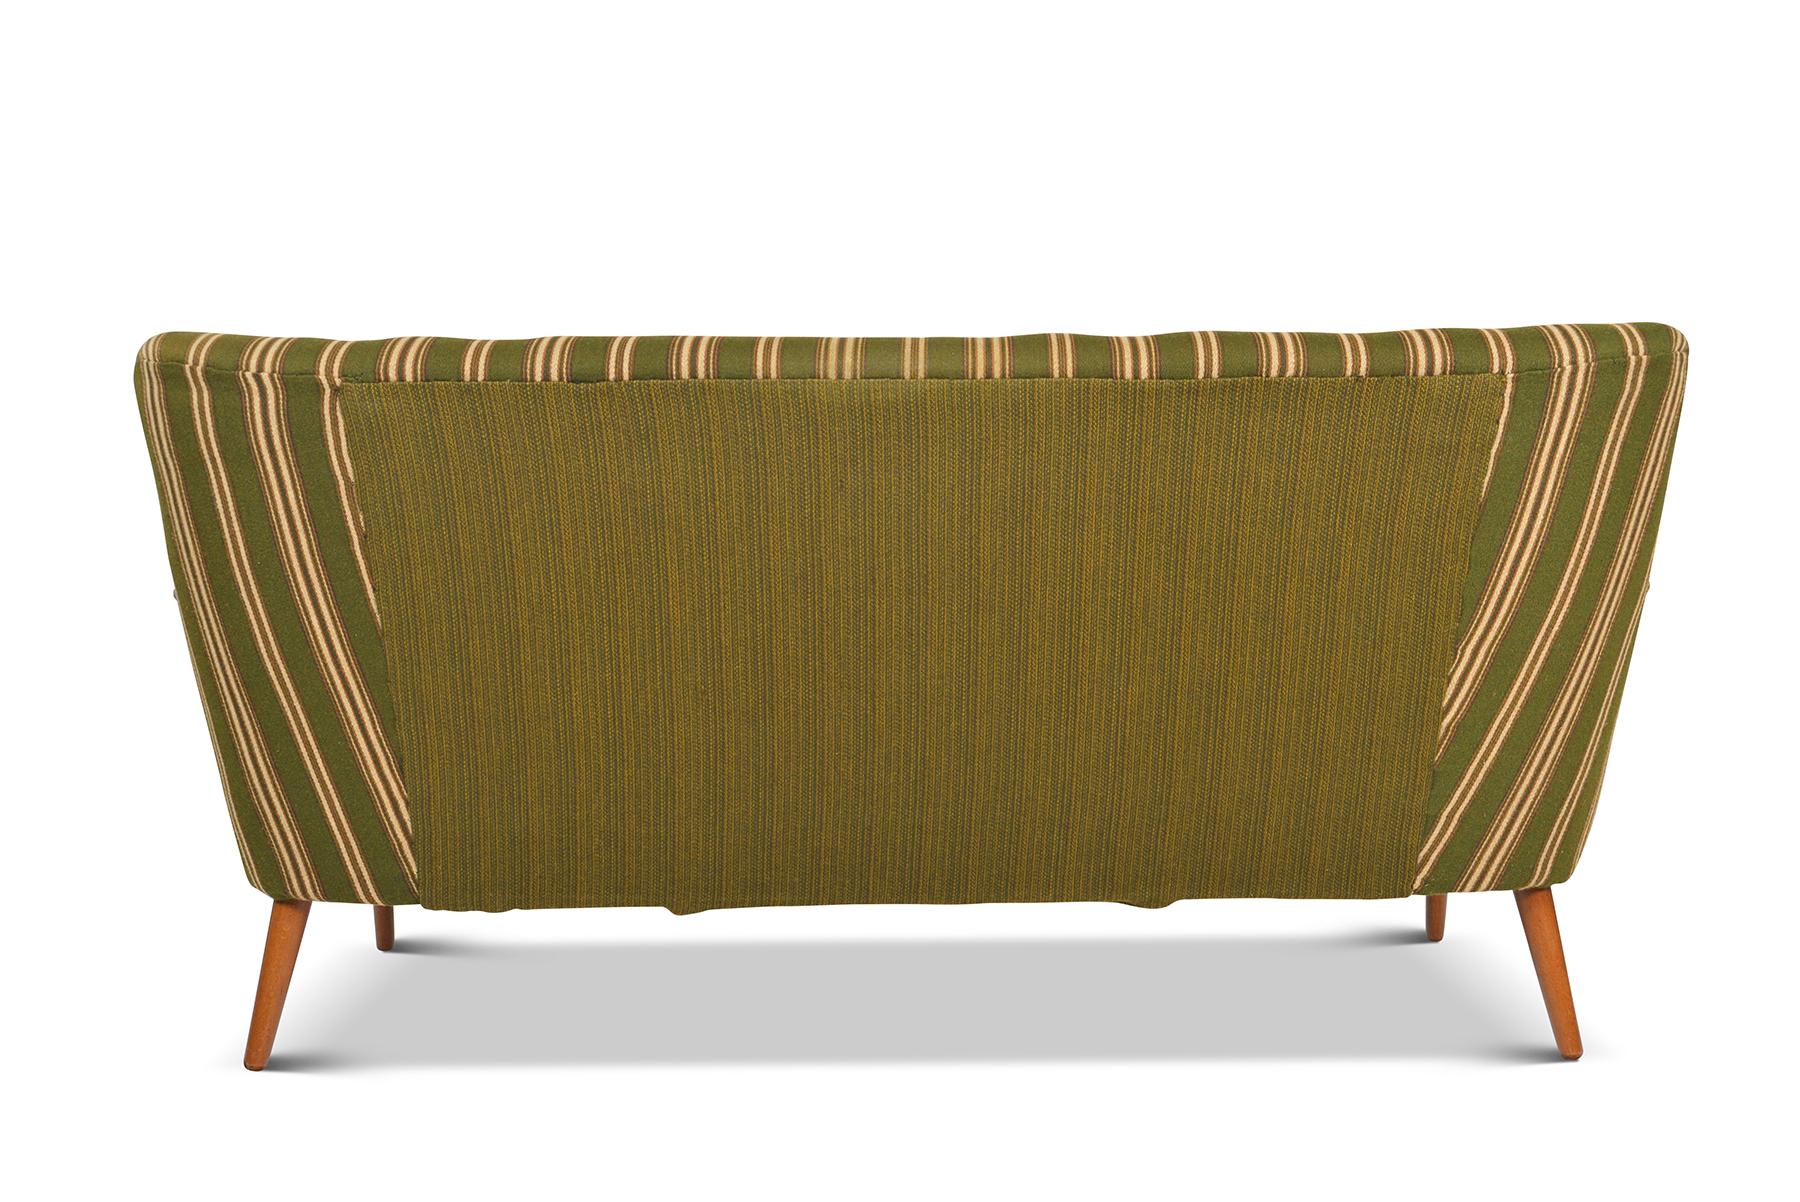 20th Century Danish Modern Sofa in Green Striped Wool with Teak Paws For Sale